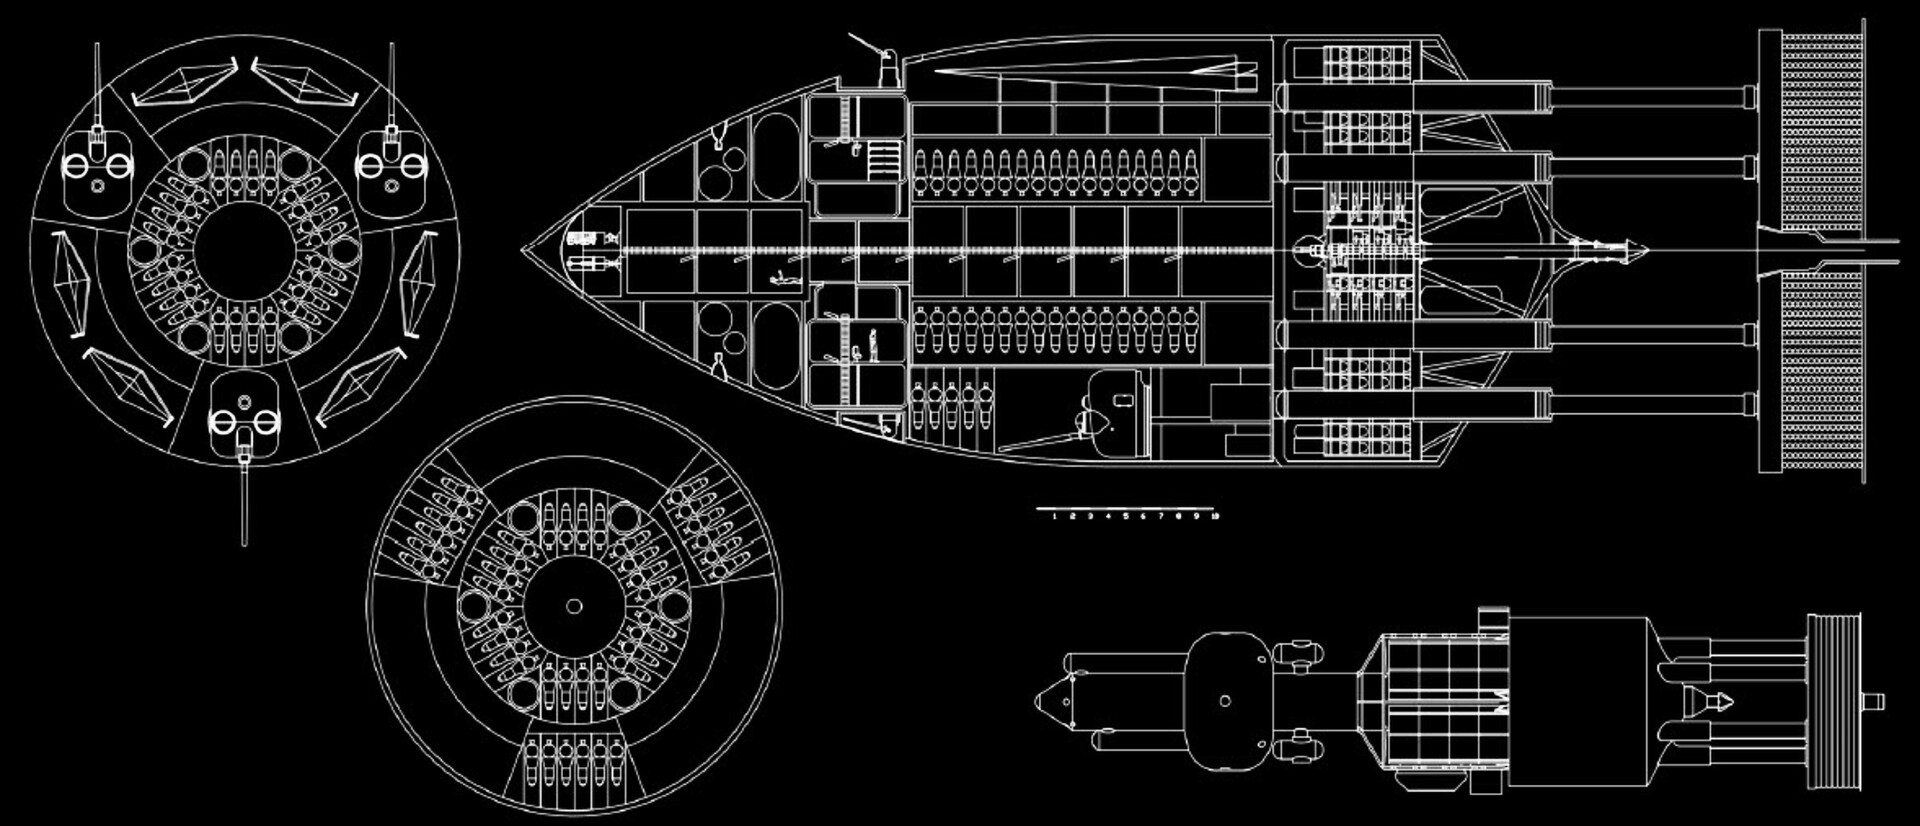 Crazy Cold War Concepts #4 Orion nuclear space battleship 